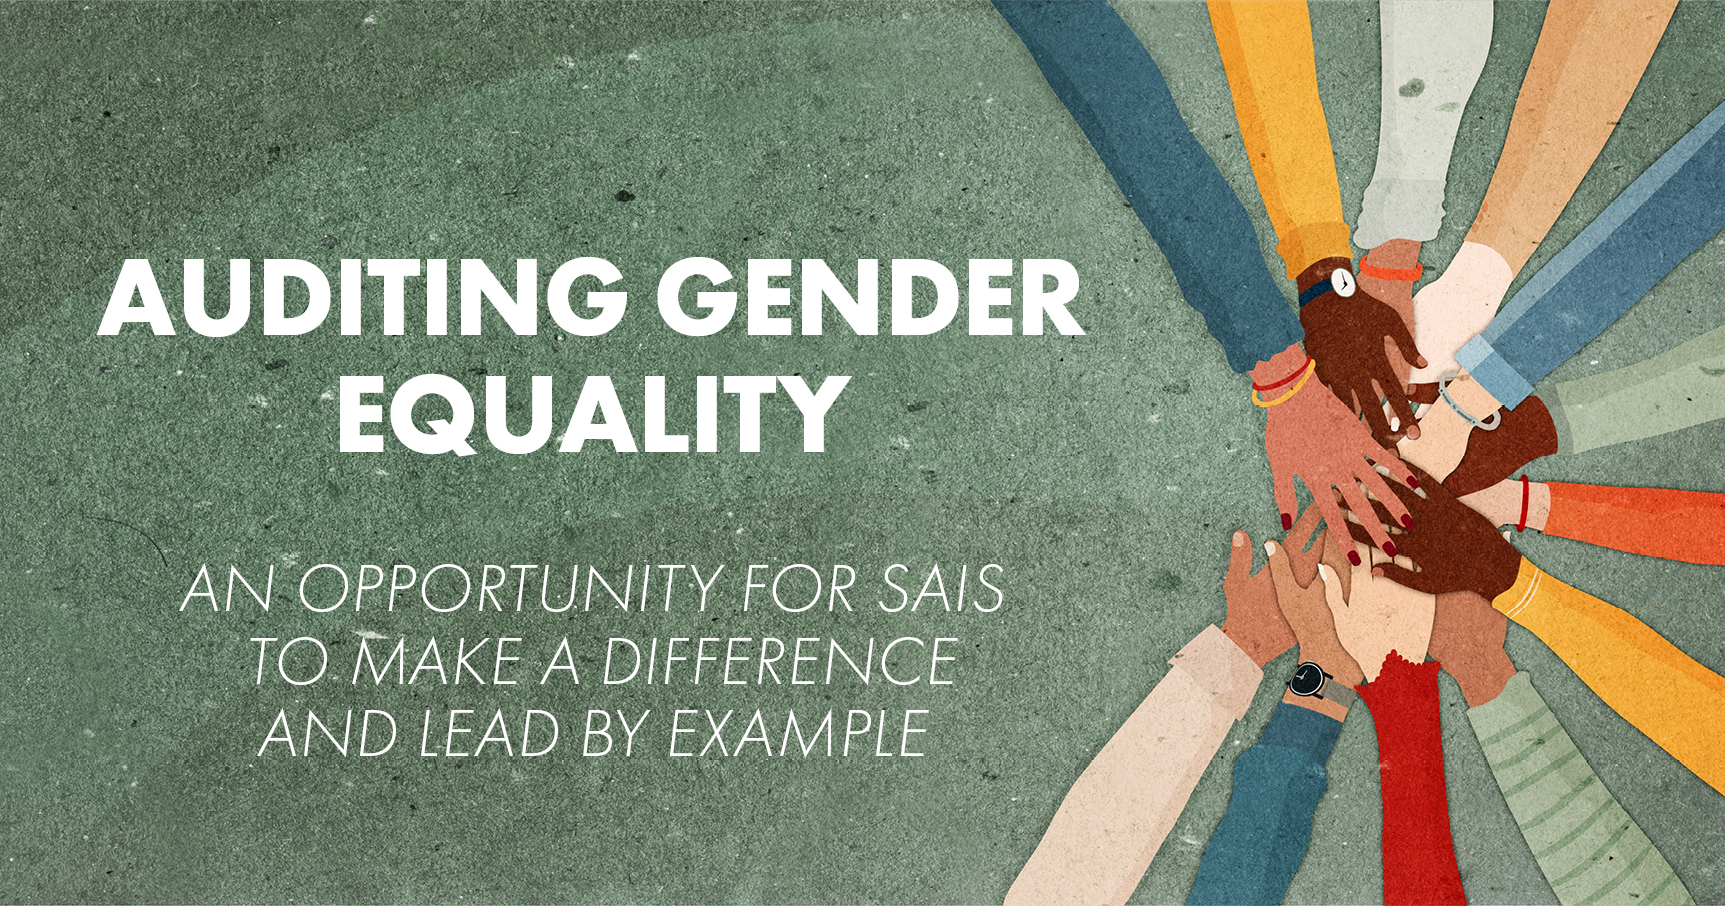 INTOSAI Journal_Winter 2022_Auditing Gender Equality cover graphic_web